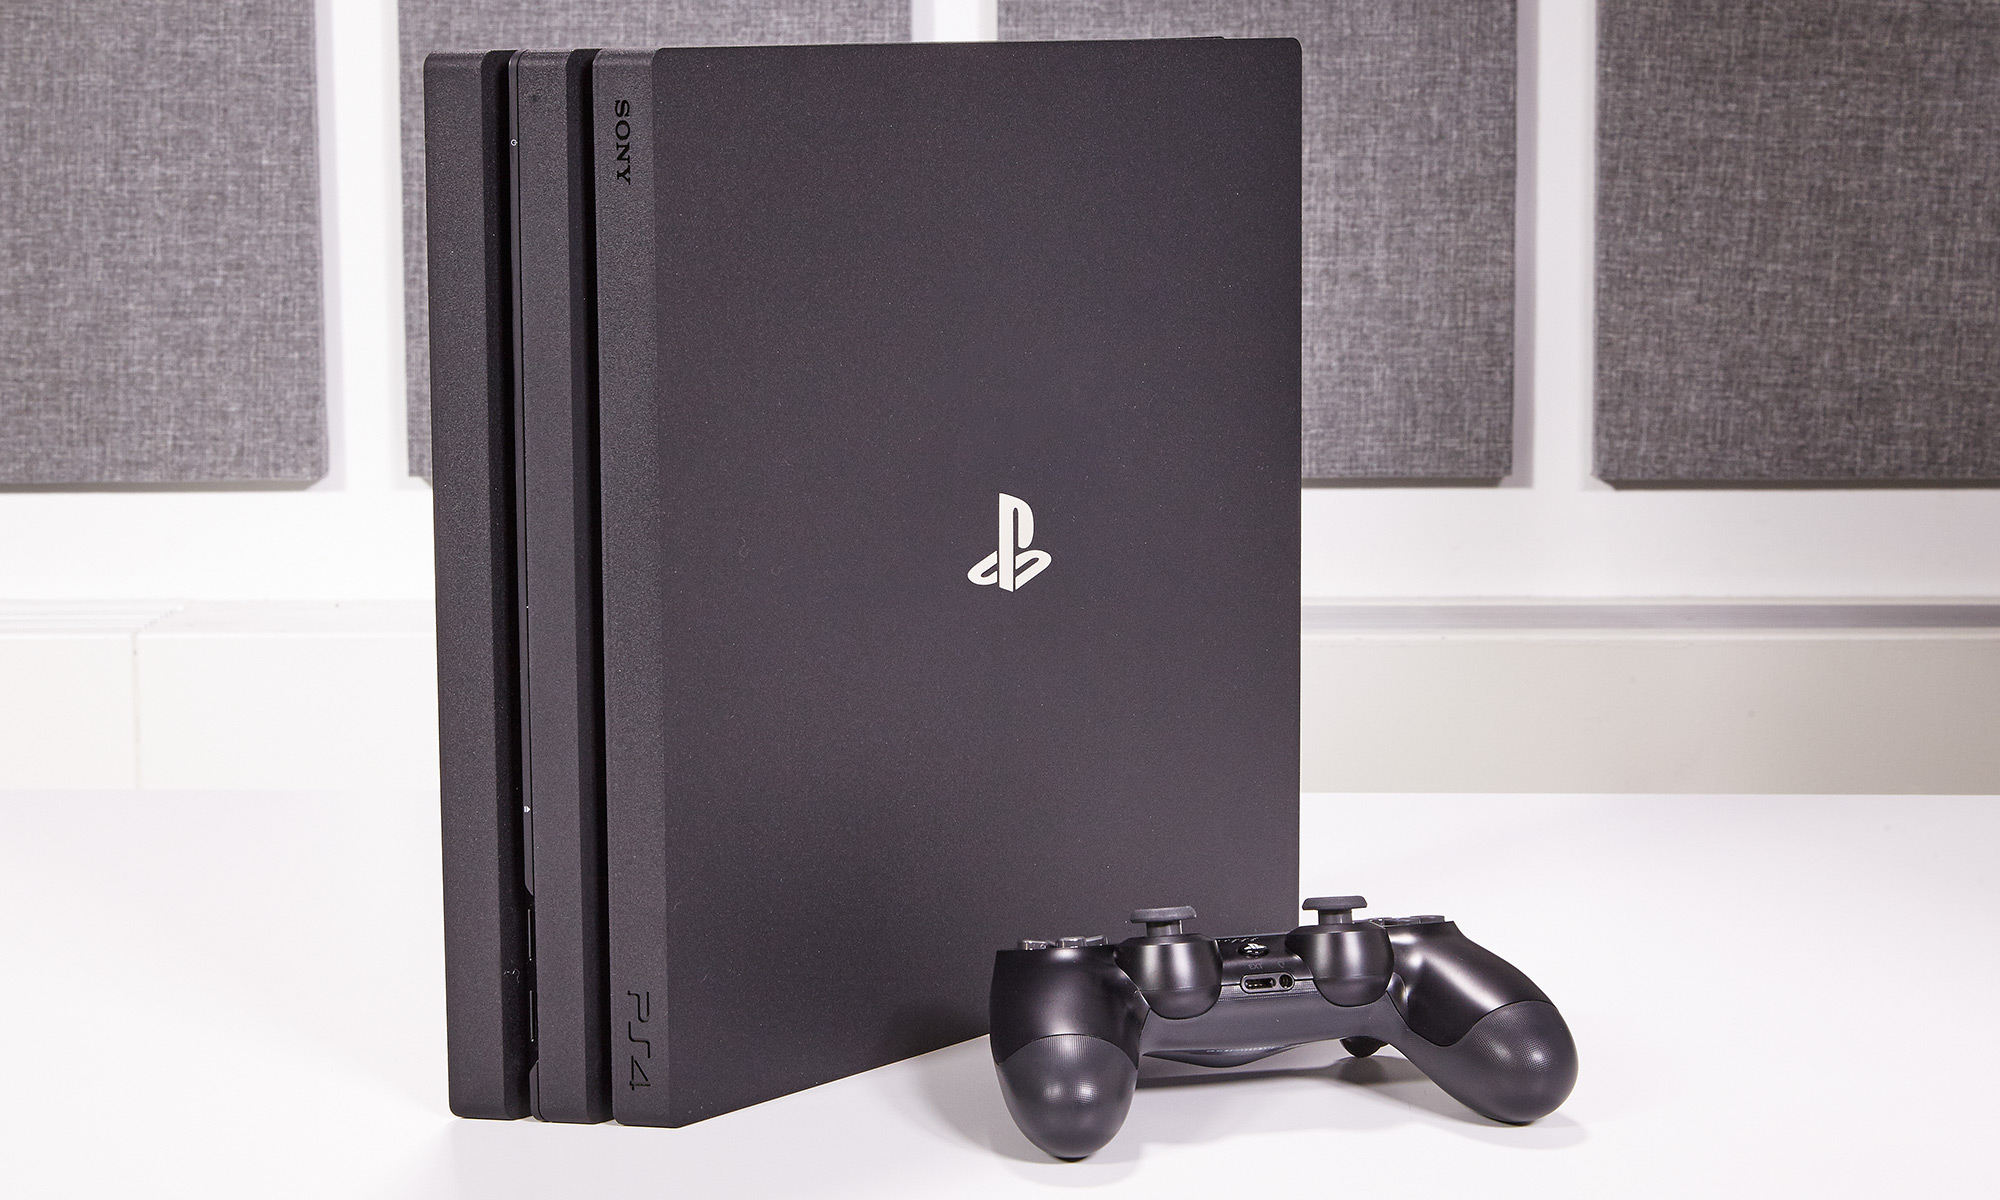 Konsekvent Temerity Alert PS4 Pro Review: The 4K Console to Beat | Tom's Guide